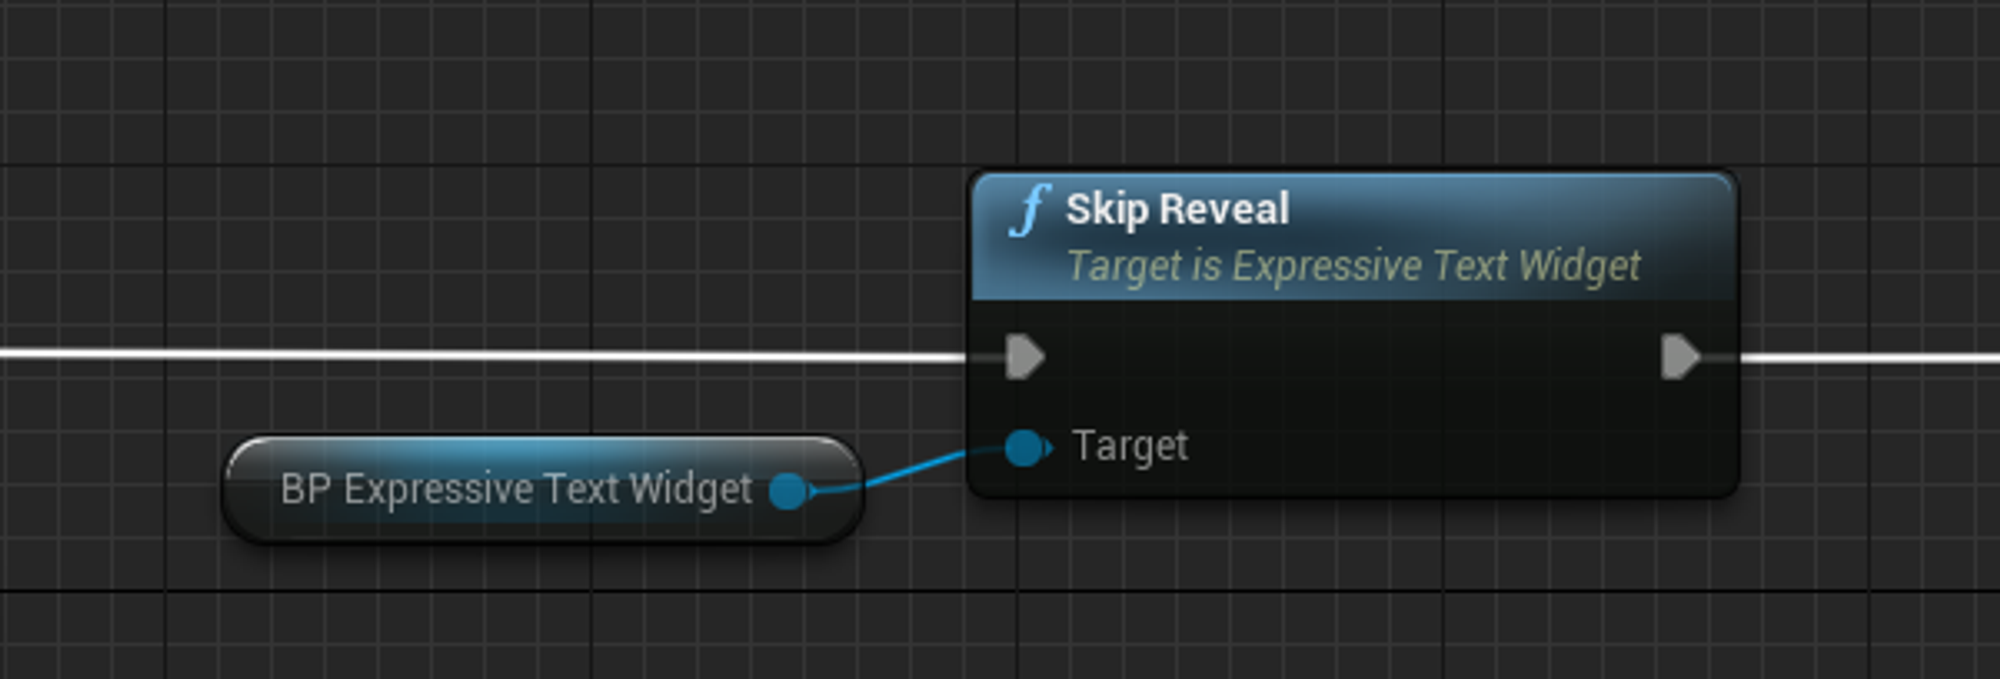 Skipping reveal text on a UI Widget